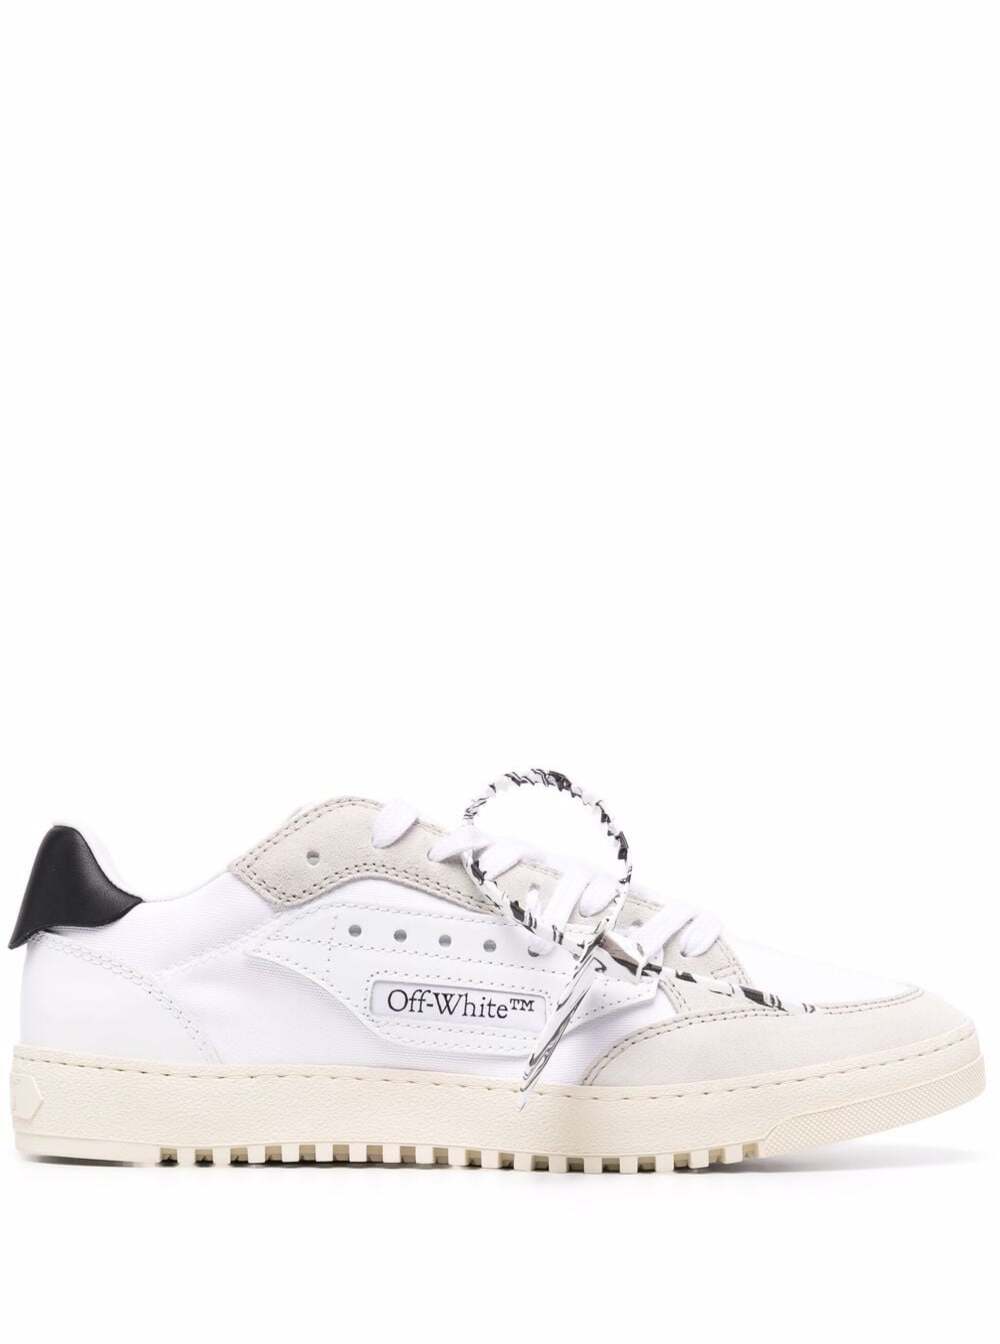 Off-White 5.0 Leather And Canvas Sneakers